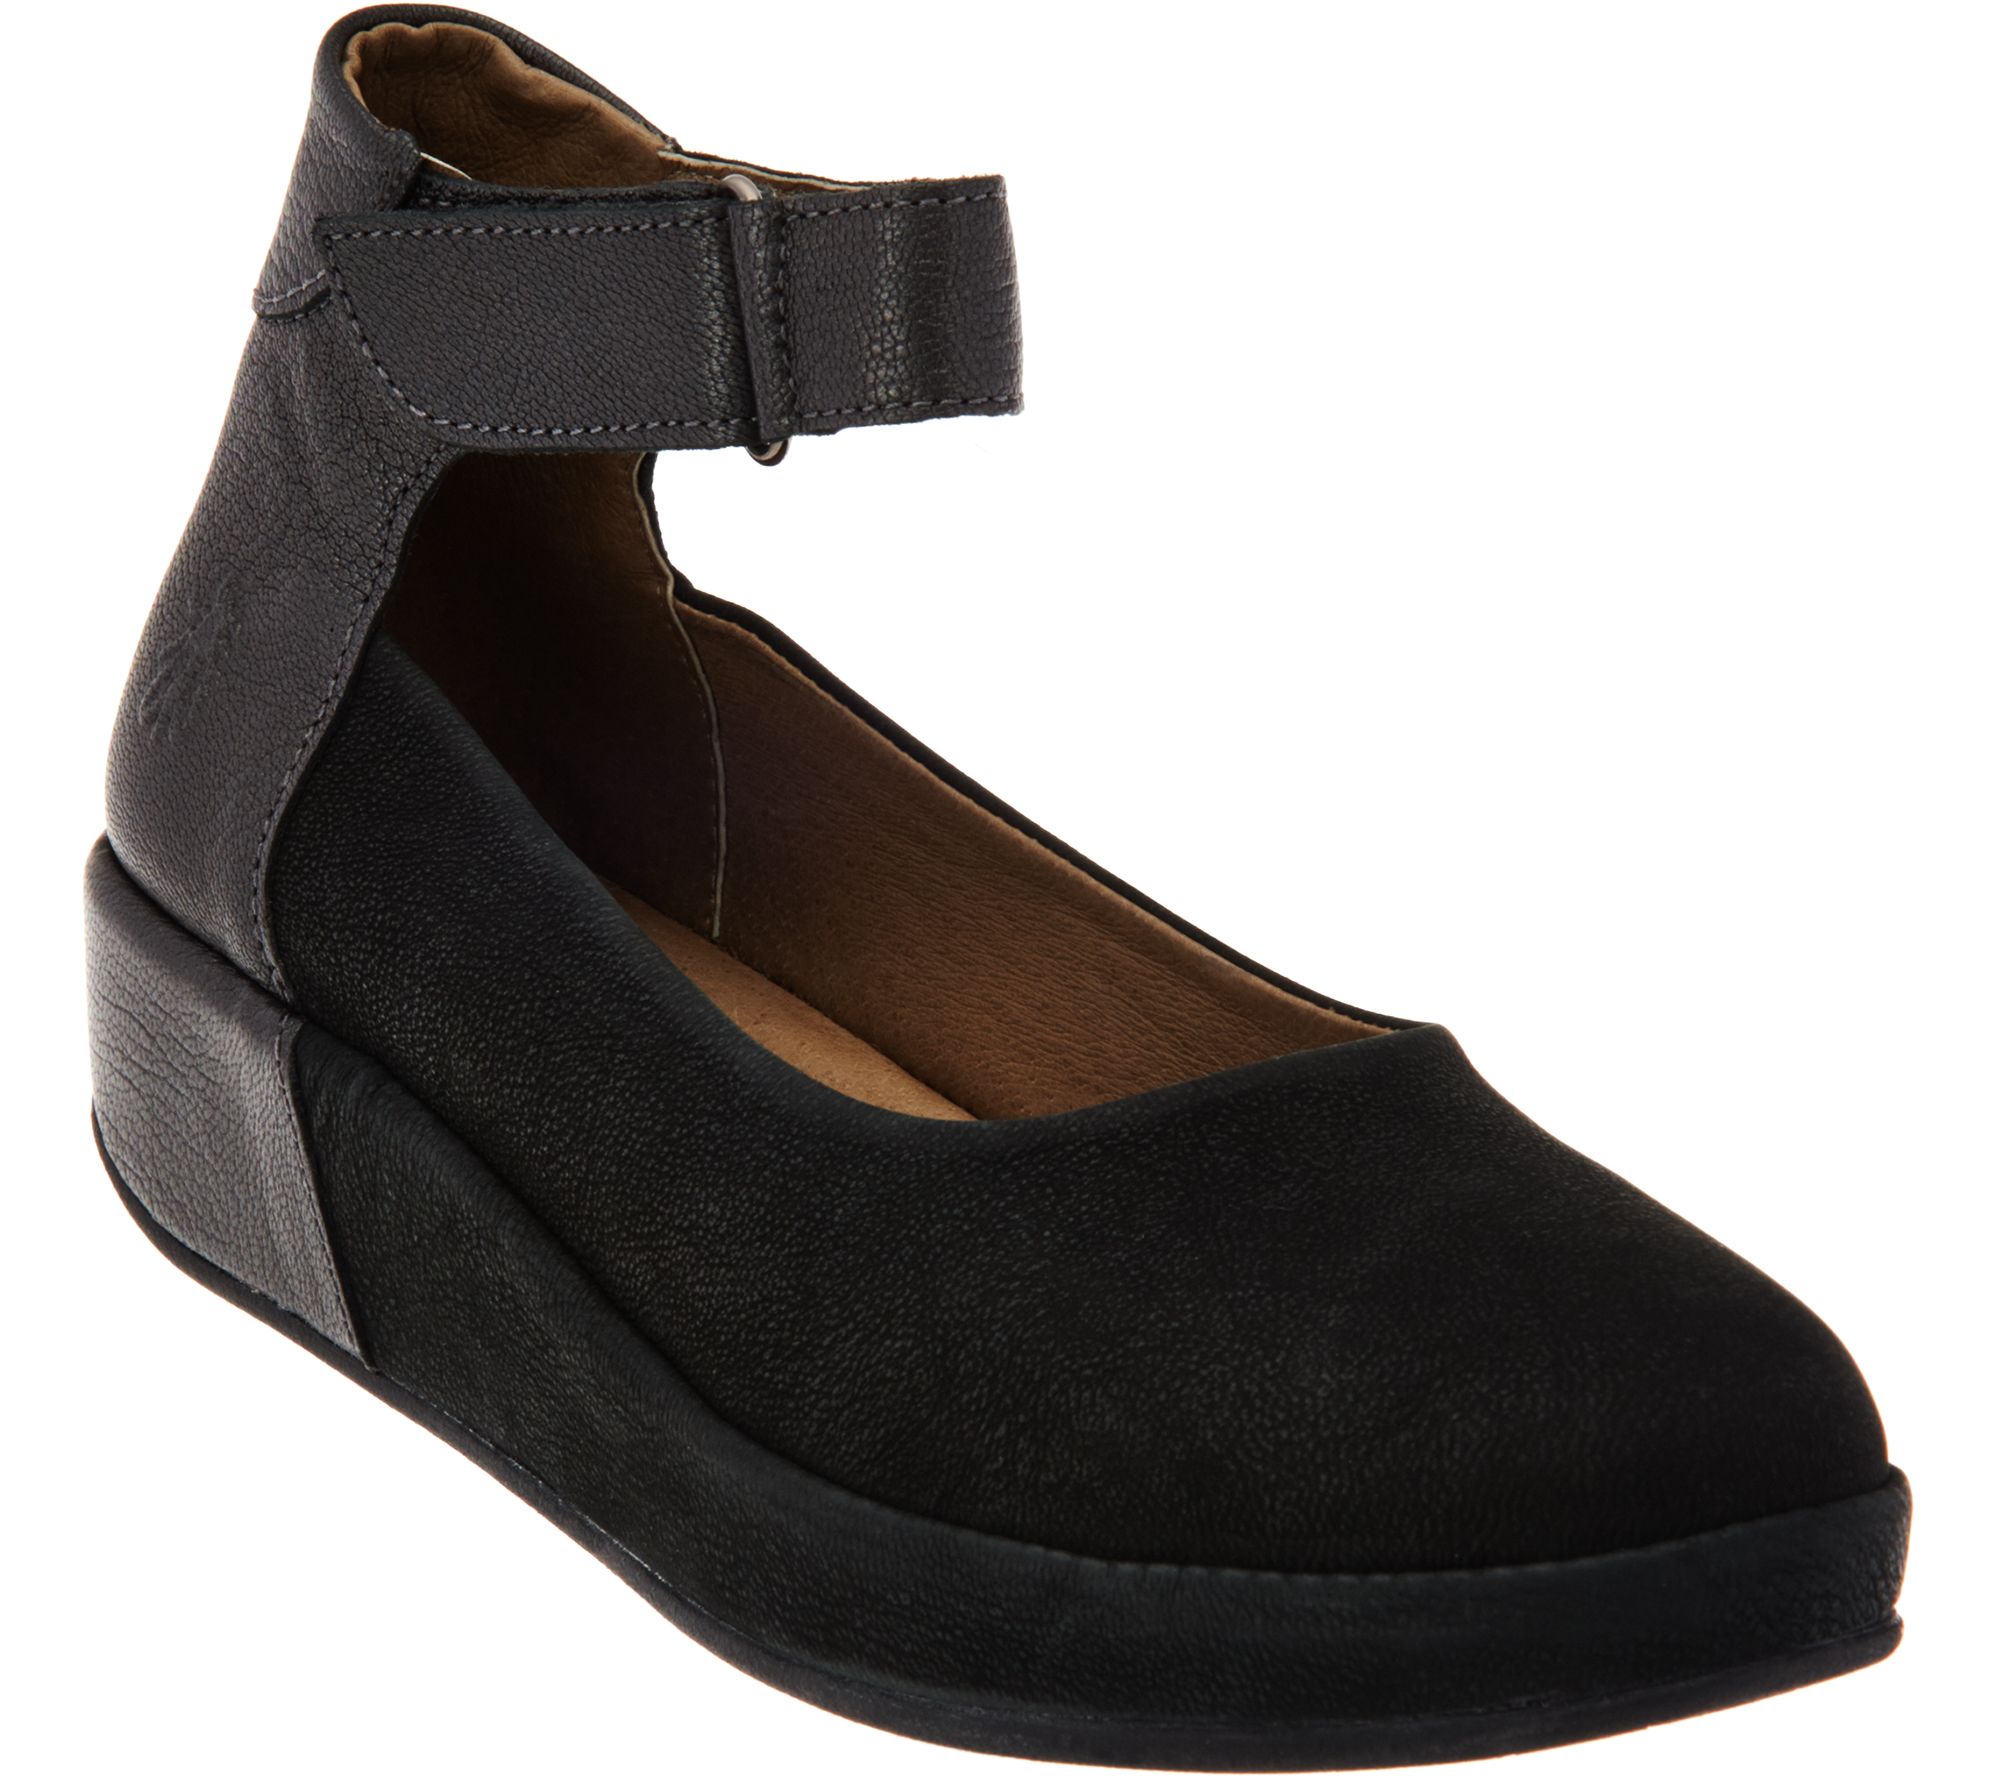 FLY London Slip-on Shoes with Adj. Strap - Bana - A283460